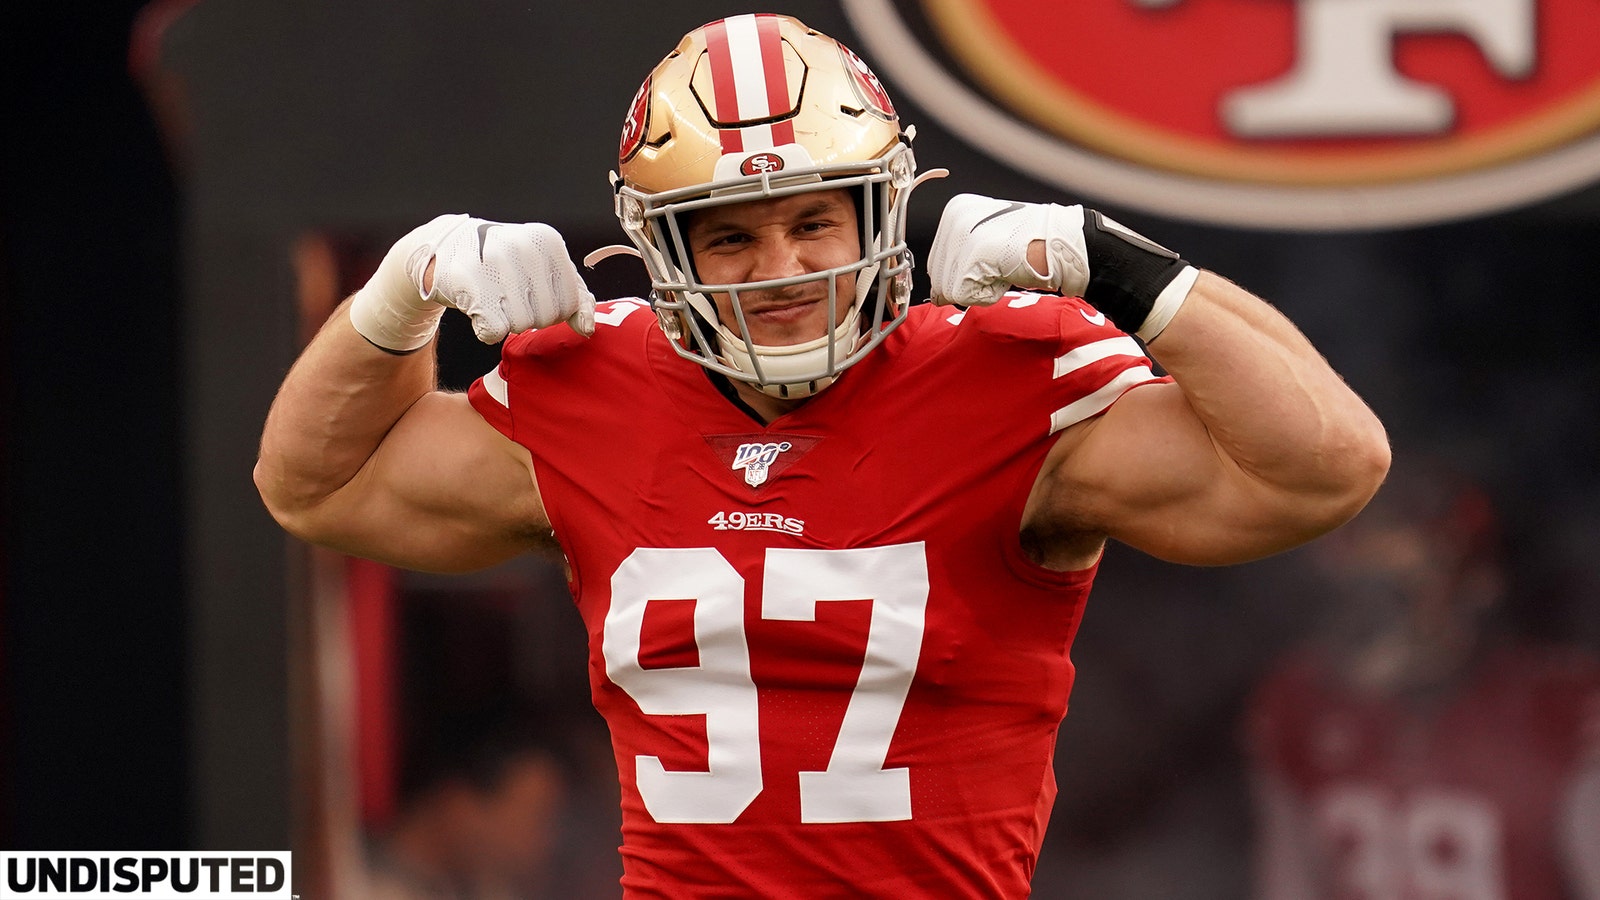 49ers vs. Packers: Bosa doesn’t think teams made Love ‘uncomfortable’